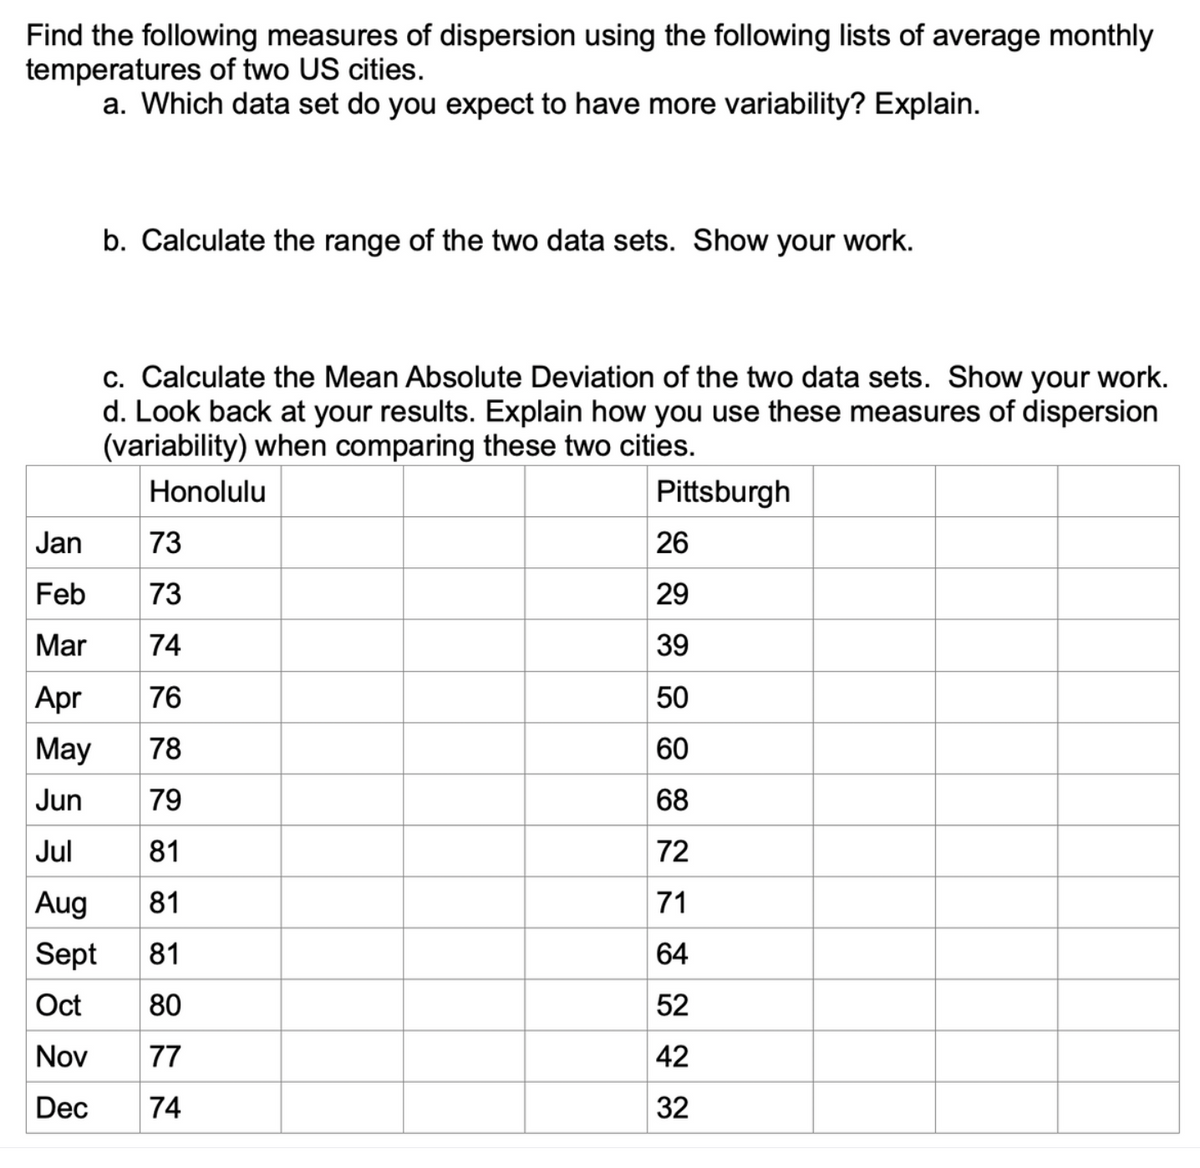 Find the following measures of dispersion using the following lists of average monthly
temperatures of two US cities.
a. Which data set do you expect to have more variability? Explain.
b. Calculate the range of the two data sets. Show your work.
c. Calculate the Mean Absolute Deviation of the two data sets. Show your work.
d. Look back at your results. Explain how you use these measures of dispersion
(variability) when comparing these two cities.
Honolulu
Pittsburgh
Jan
73
26
Feb
73
29
Mar
74
39
Apr
76
50
May
78
60
Jun
79
68
Jul
81
72
Aug
81
71
Sept
81
64
Oct
80
52
Nov
77
42
Dec
74
32
my
